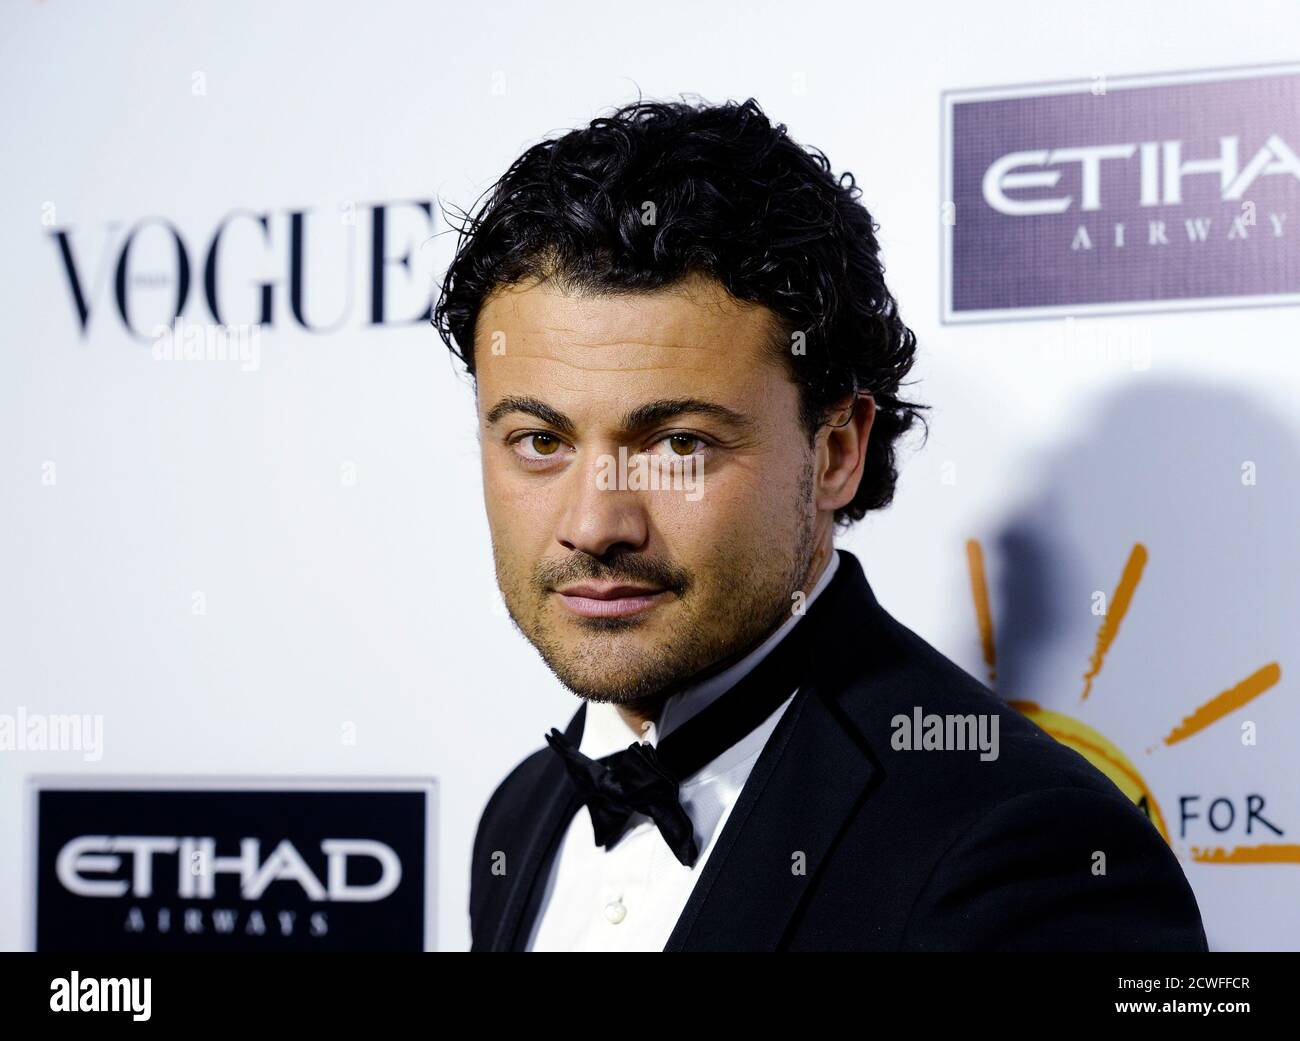 Italian operatic tenor Vittorio Grigolo attends the Dream For Future Africa Foundation's inaugural gala in Beverly Hills, California, October 24, 2013.  REUTERS/Kevork Djansezian (UNITED STATES - Tags: ENTERTAINMENT HEADSHOT) Stock Photo